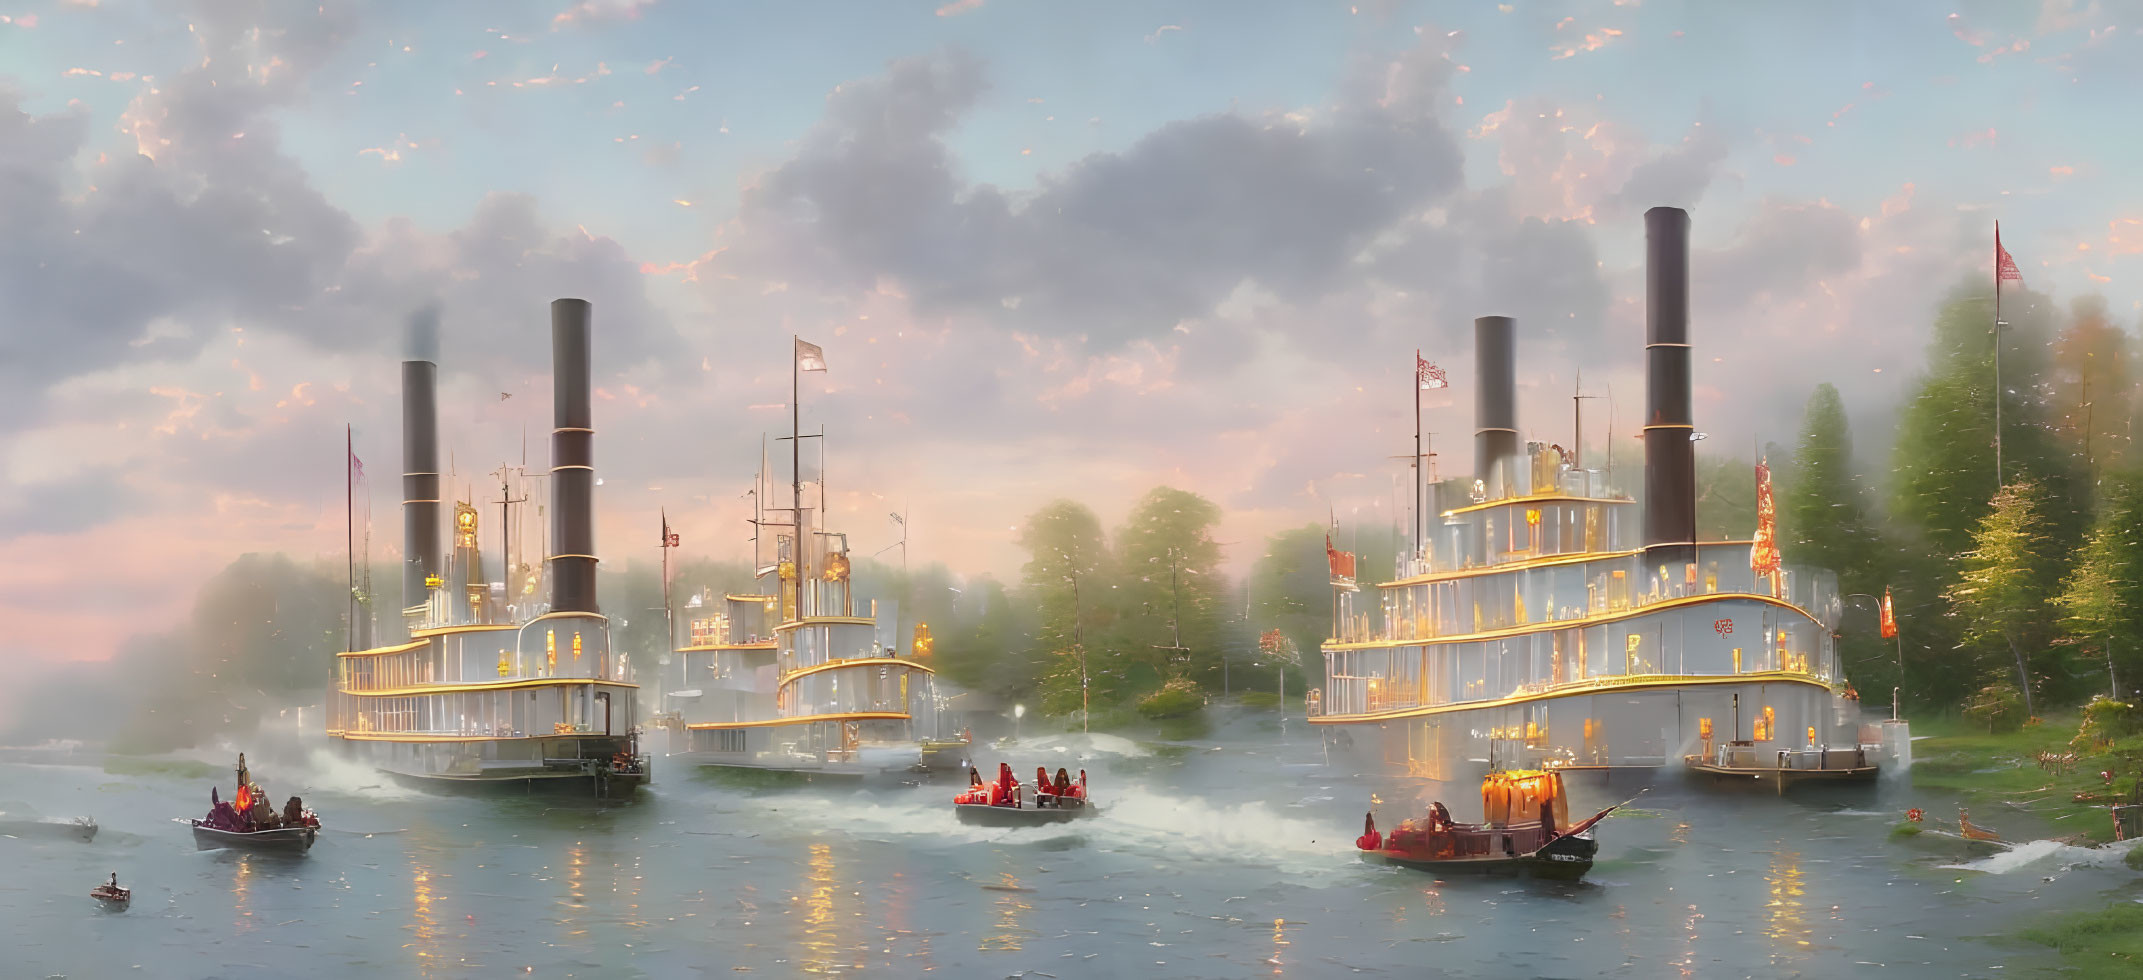 Misty River Scene with Vintage Paddle Steamboats